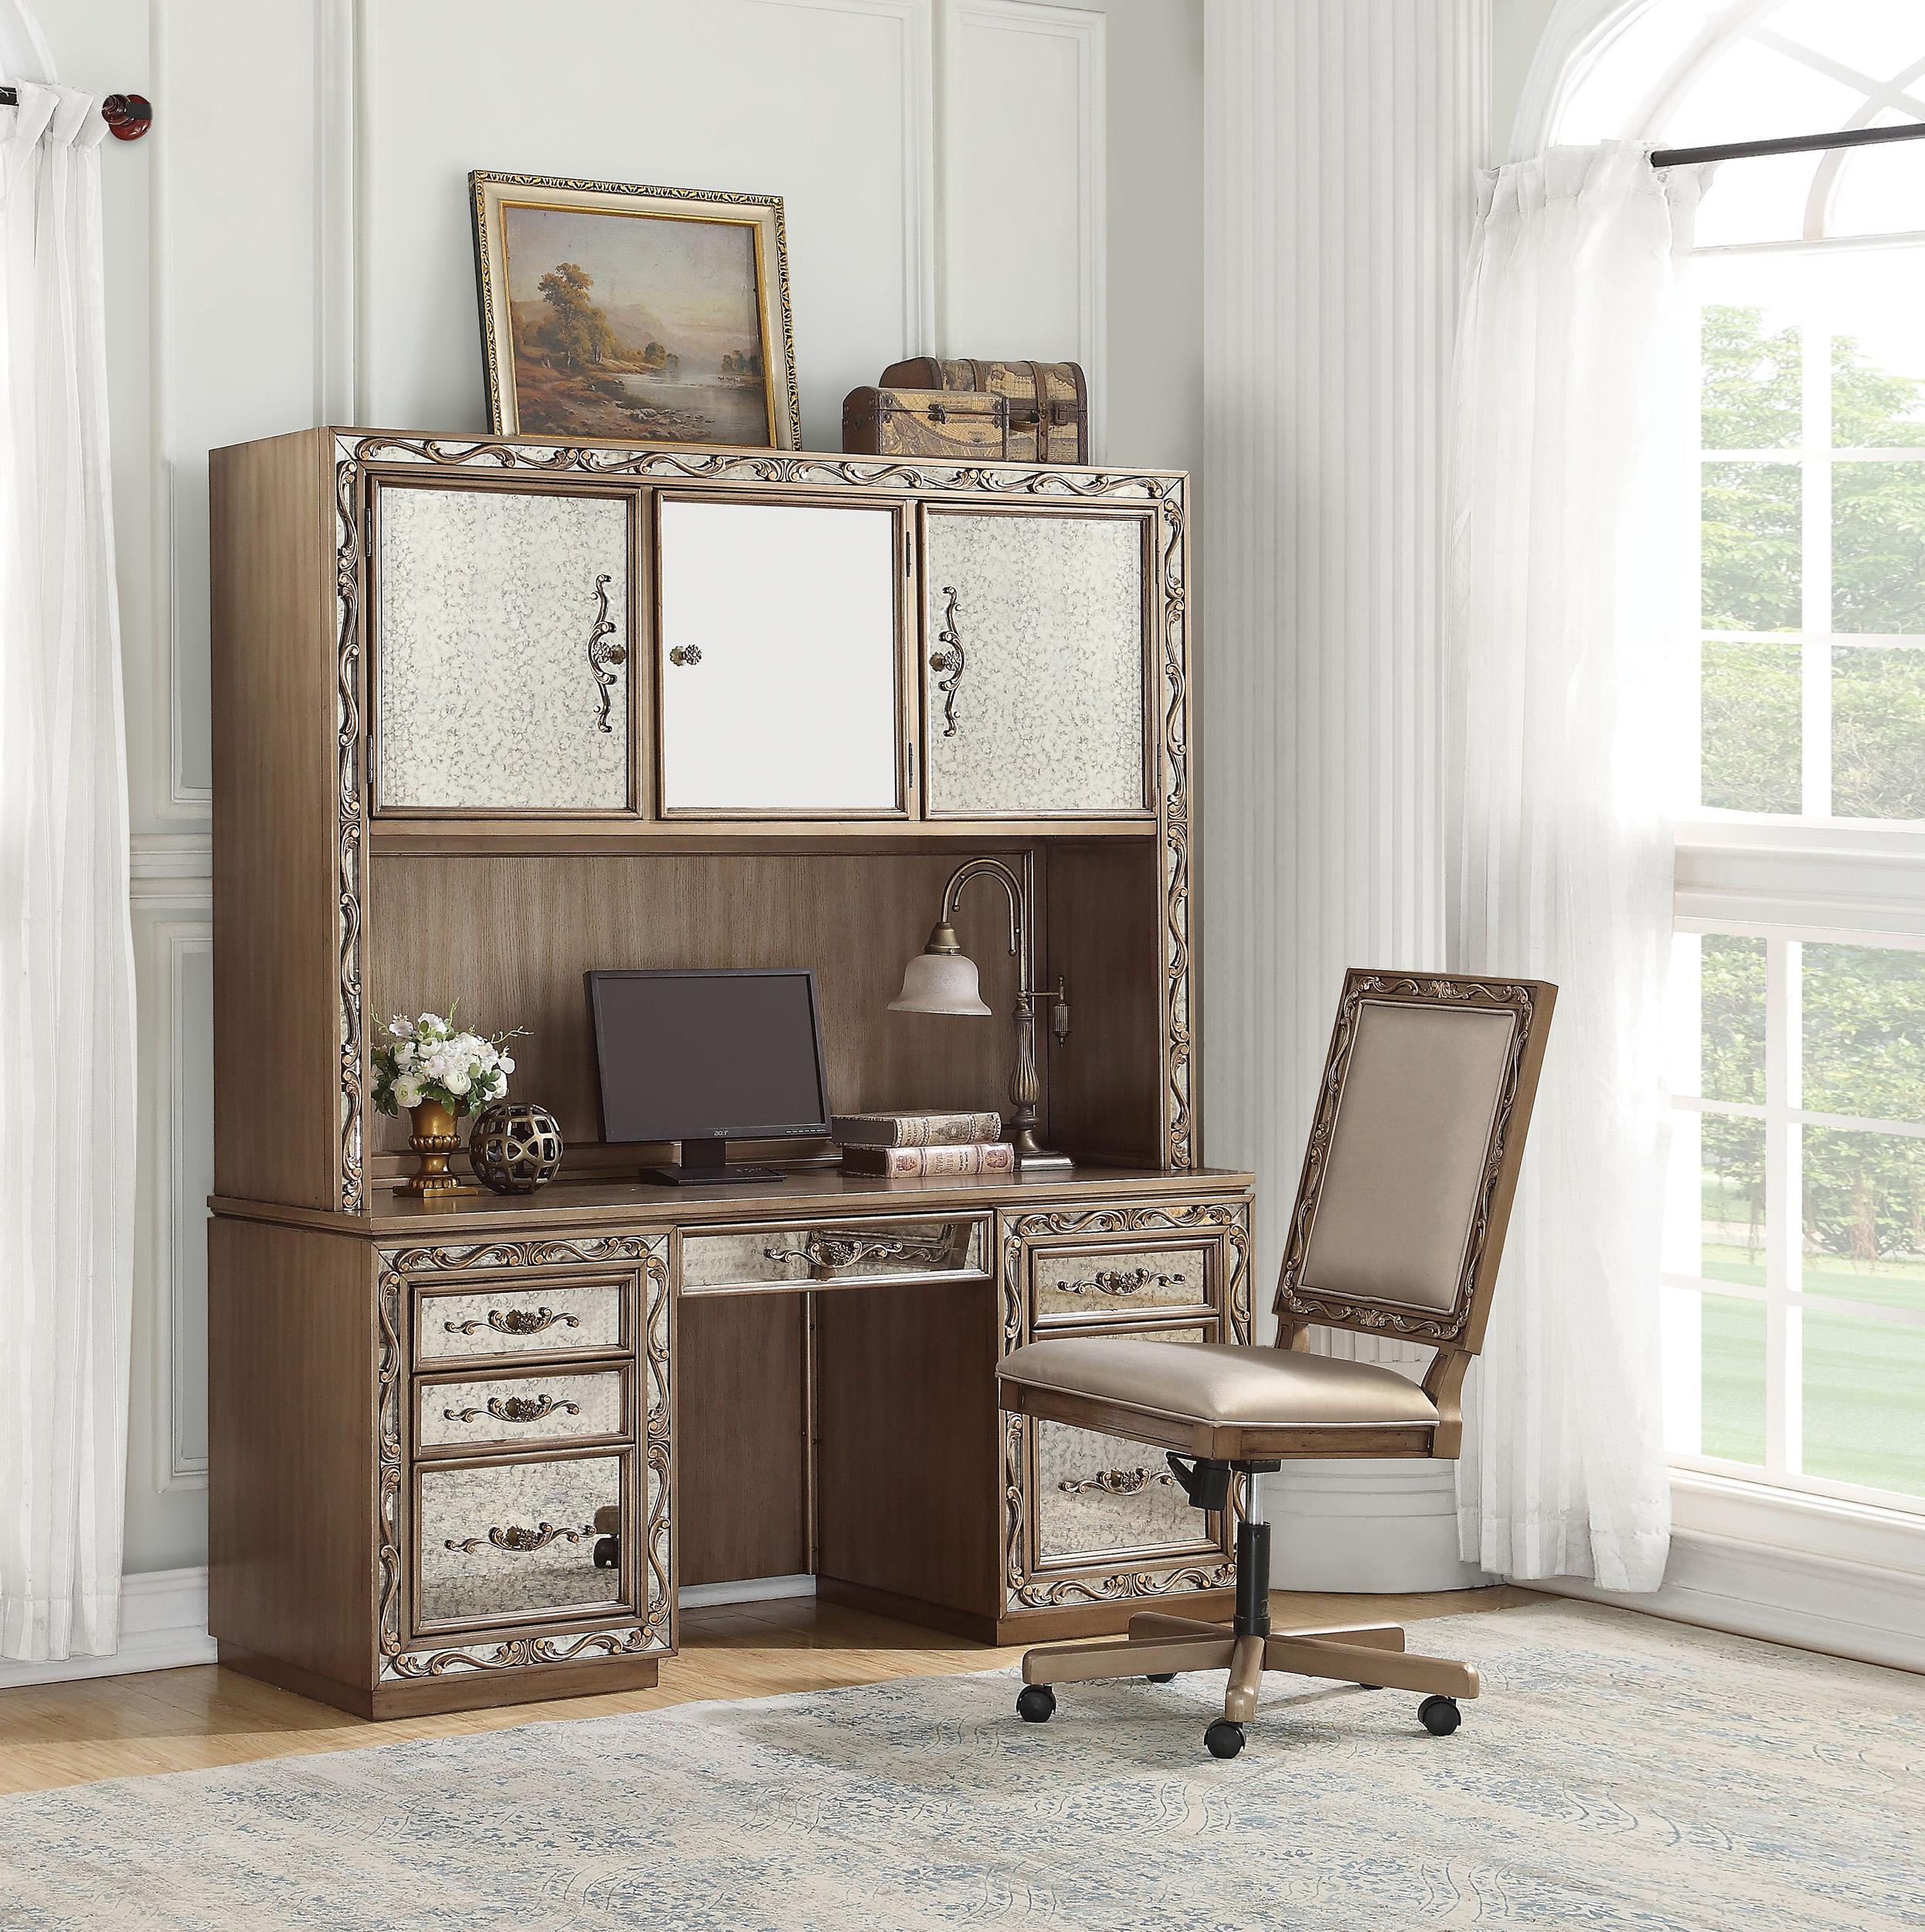 Classic, Traditional Home Office Set Orianne Orianne-93790 91437 in Antique, Gold, Champagne PU